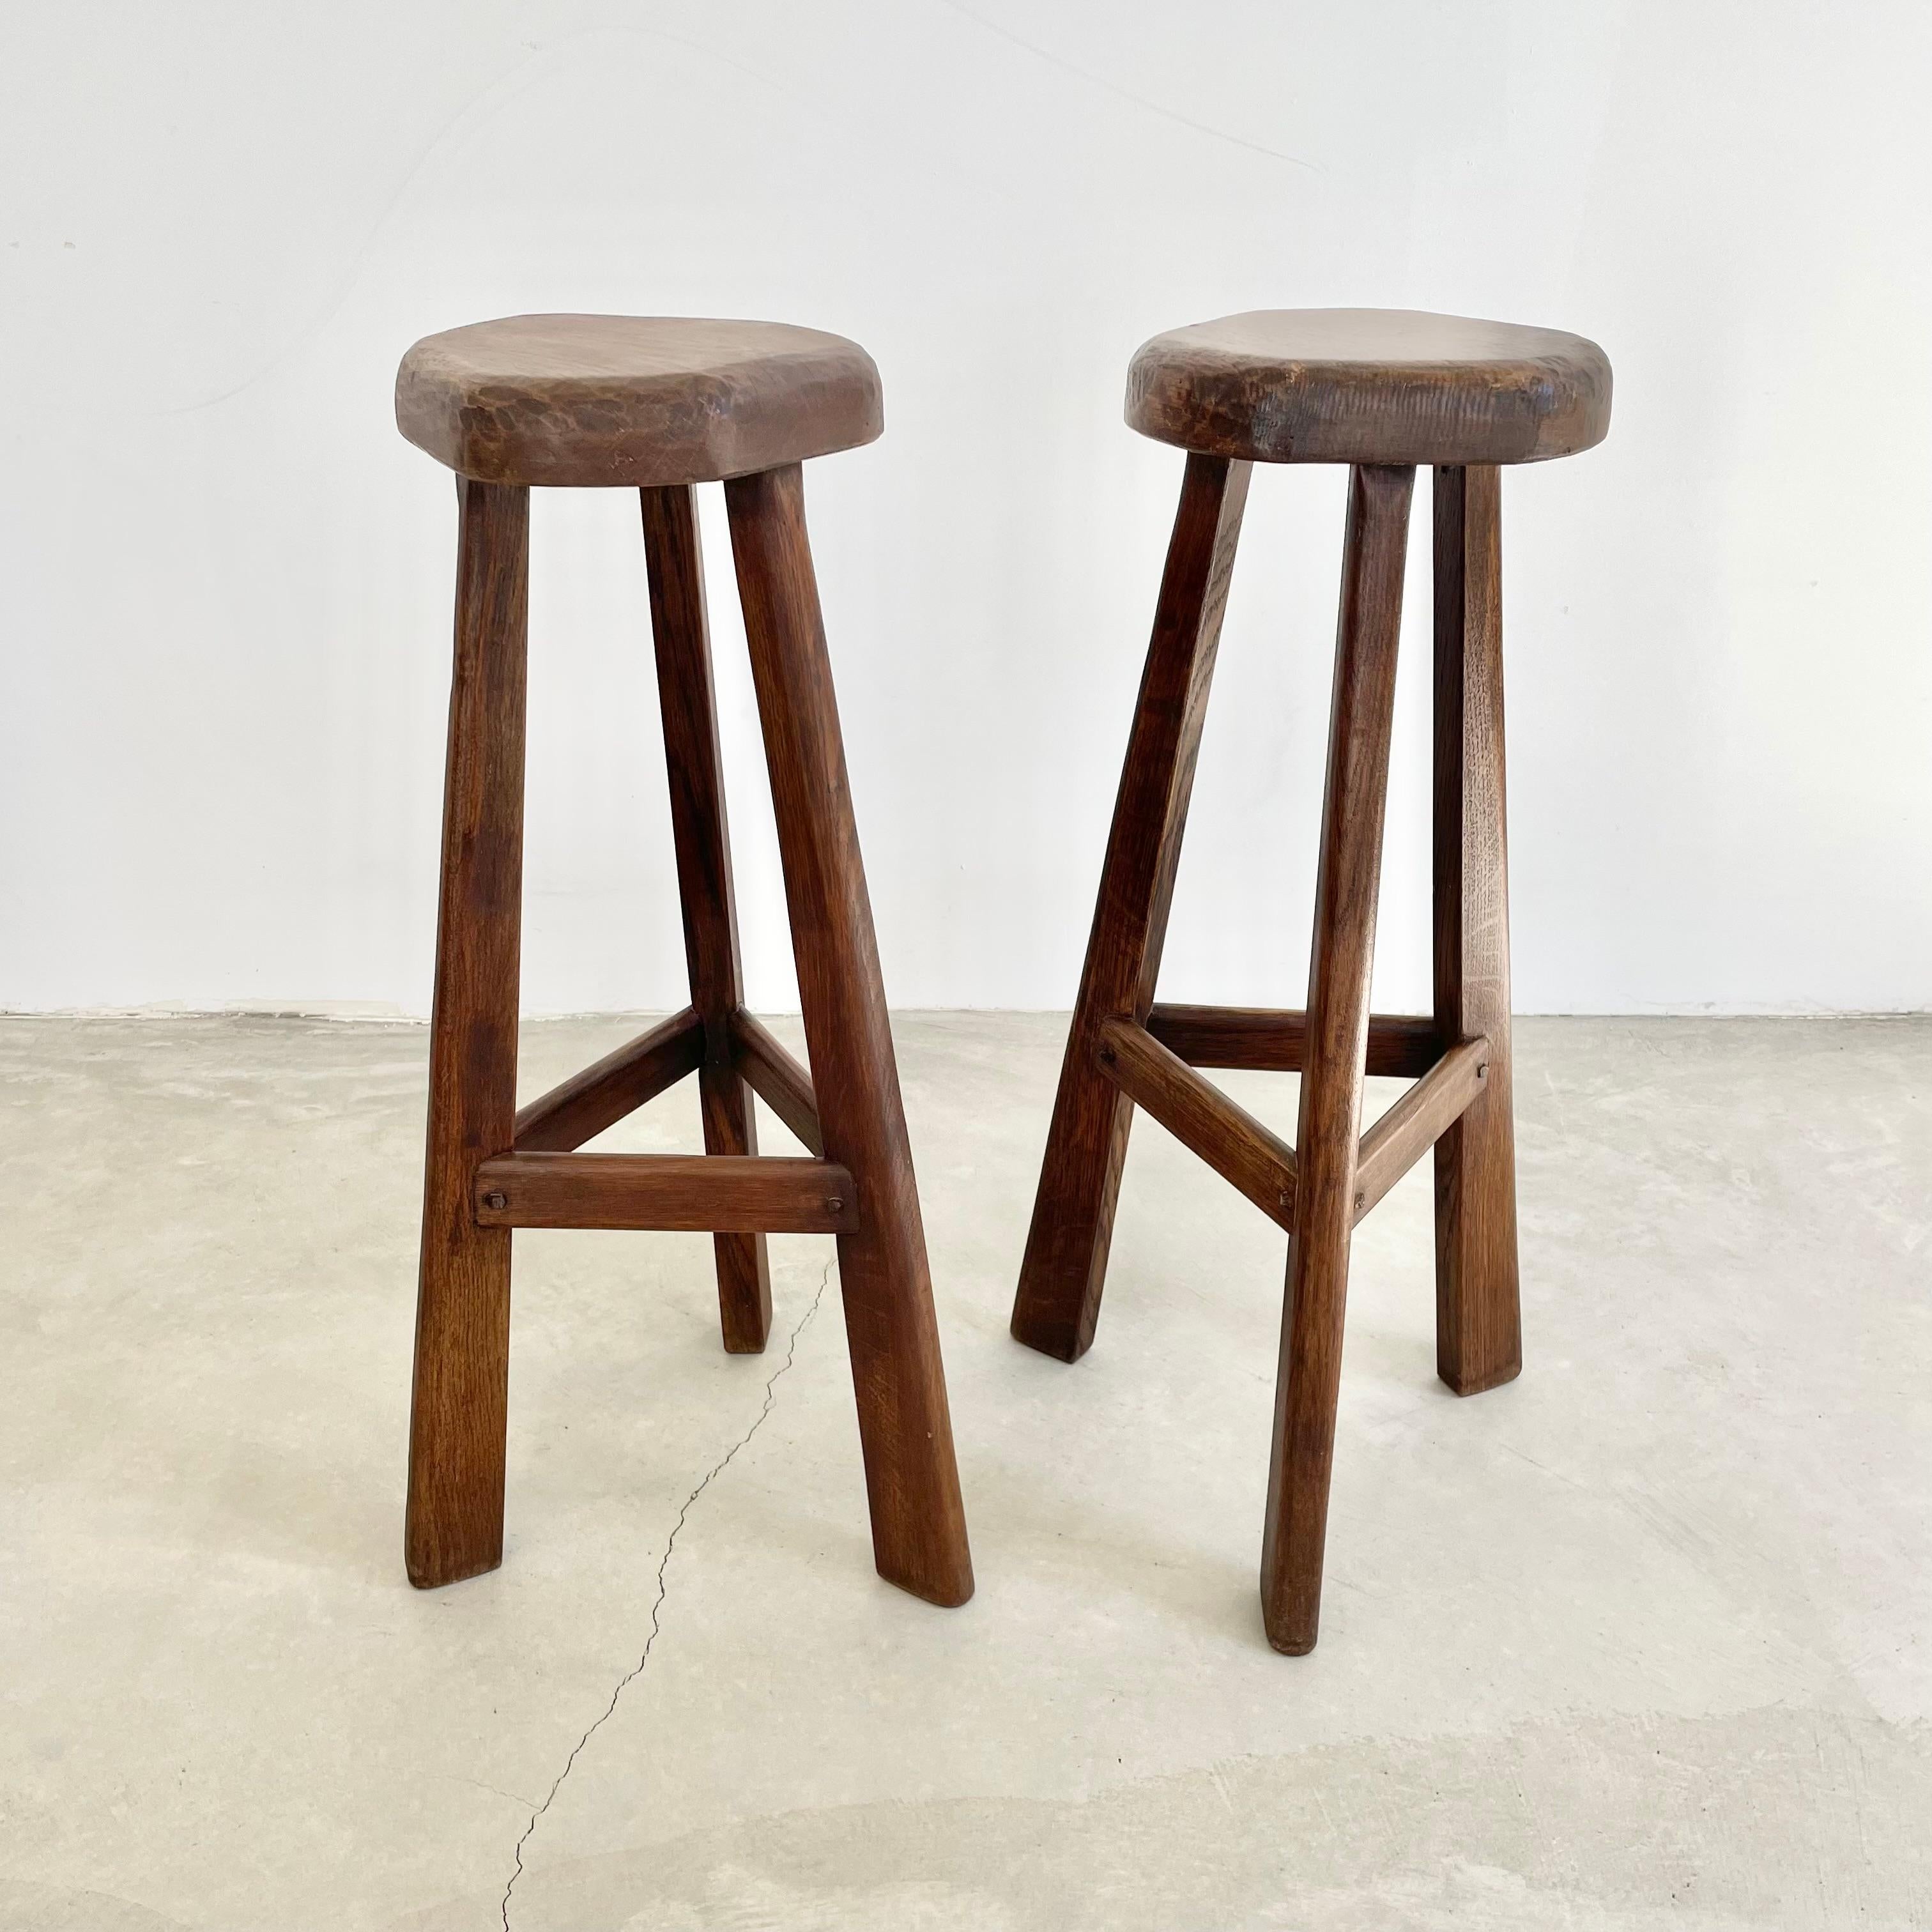 French Pair of Tall Brutalist Wood Stools, 1960s France For Sale